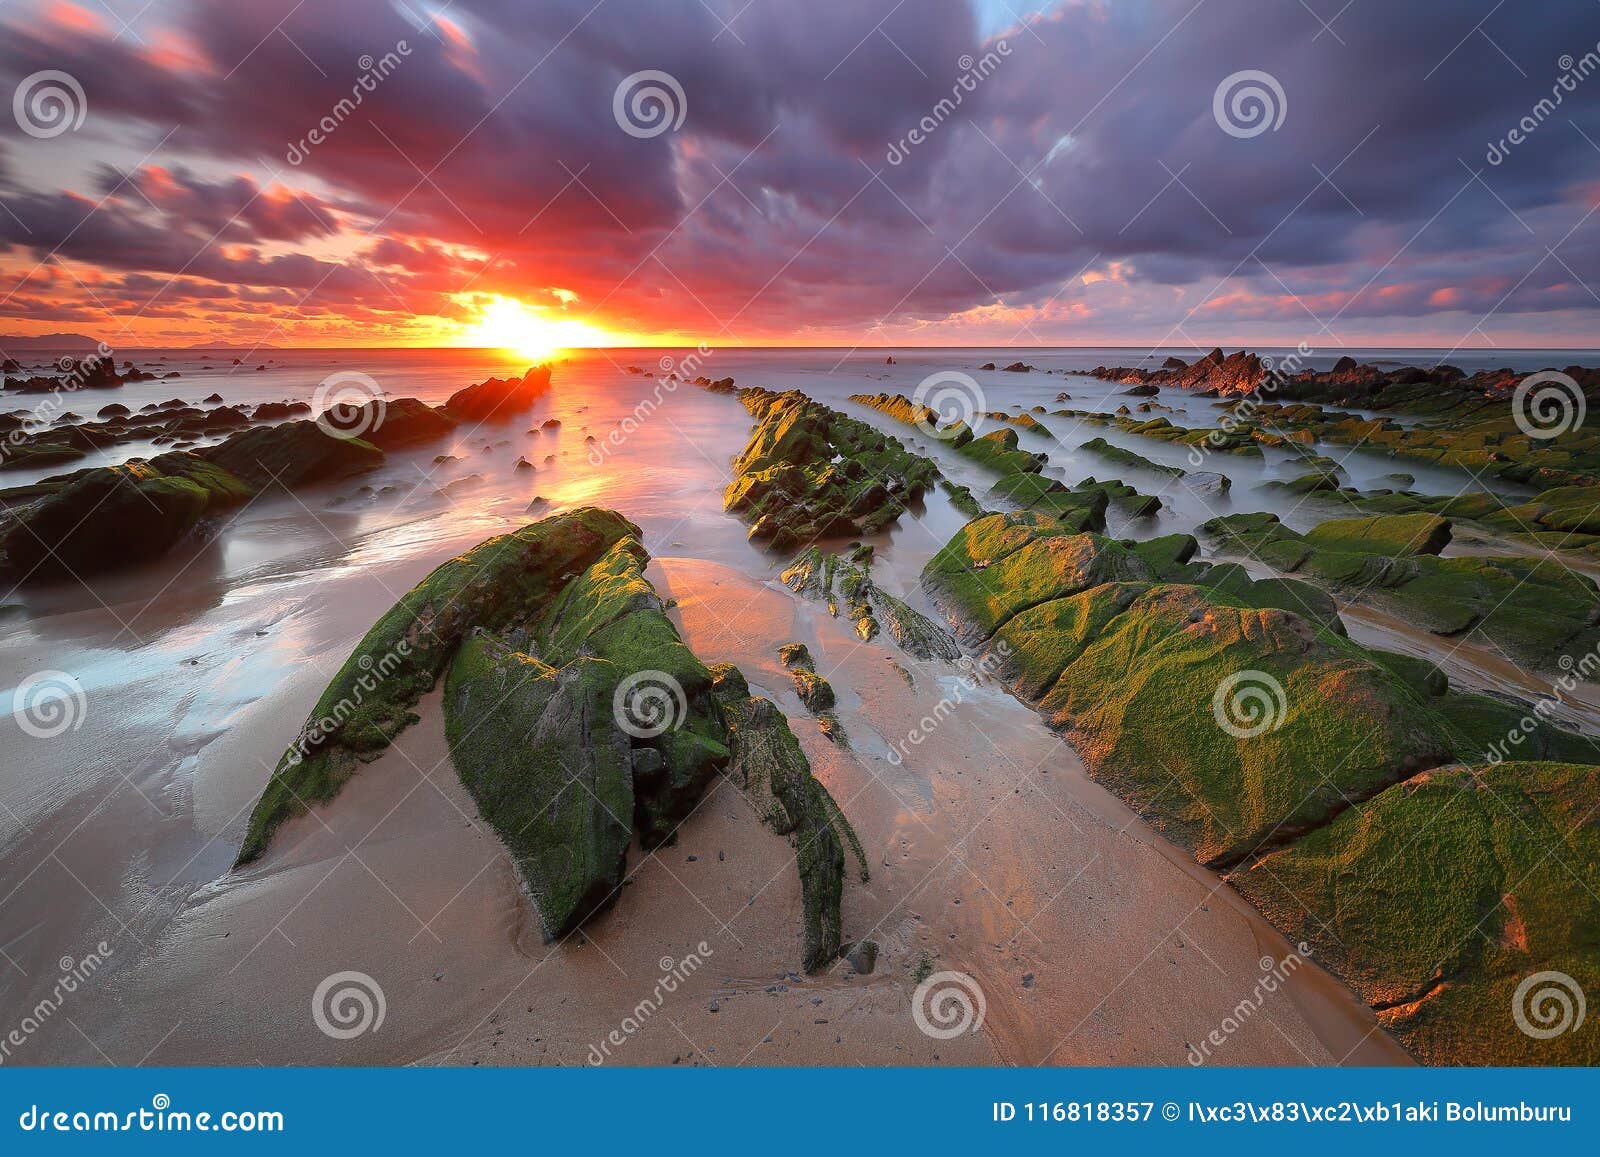 amazing sunset over barrika beach biscay, basque country scenary of game of thrones